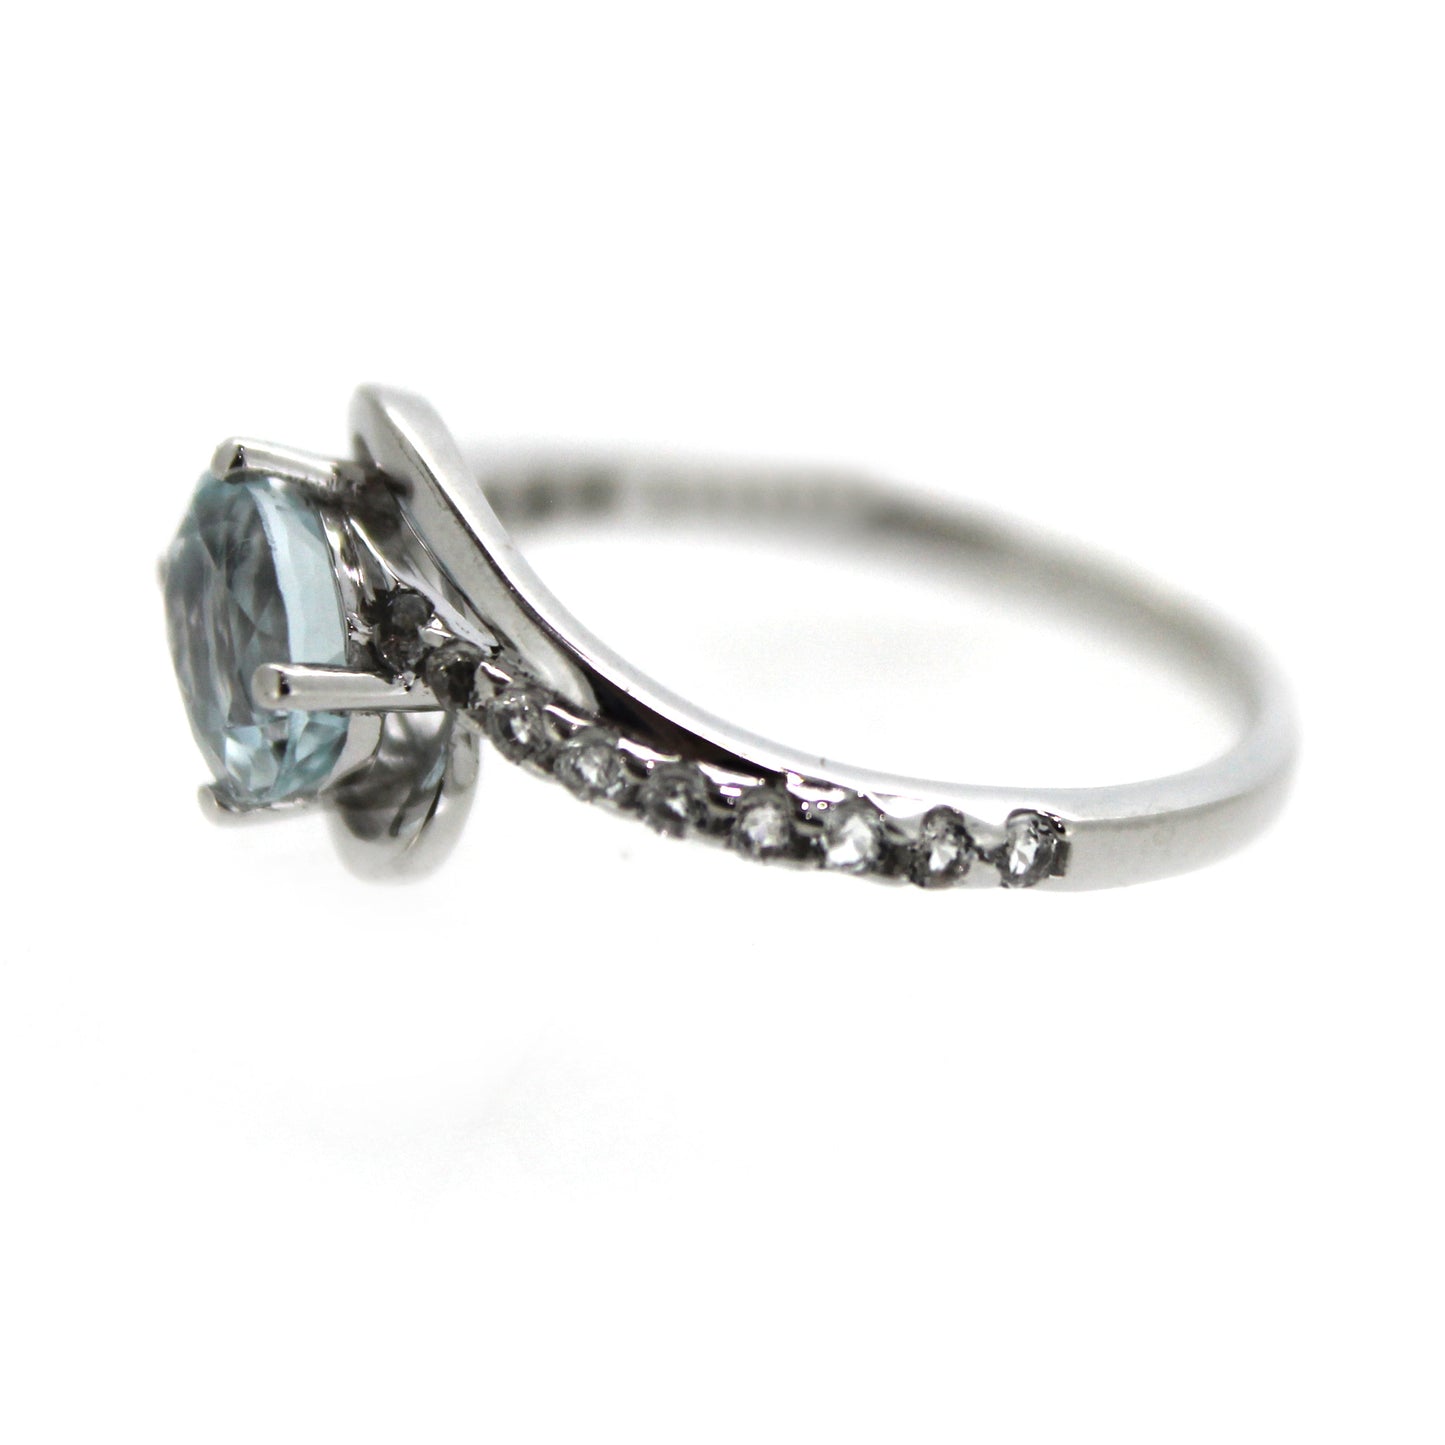  Sterling Silver Aquamarine with White Topaz Ring - Pinctore